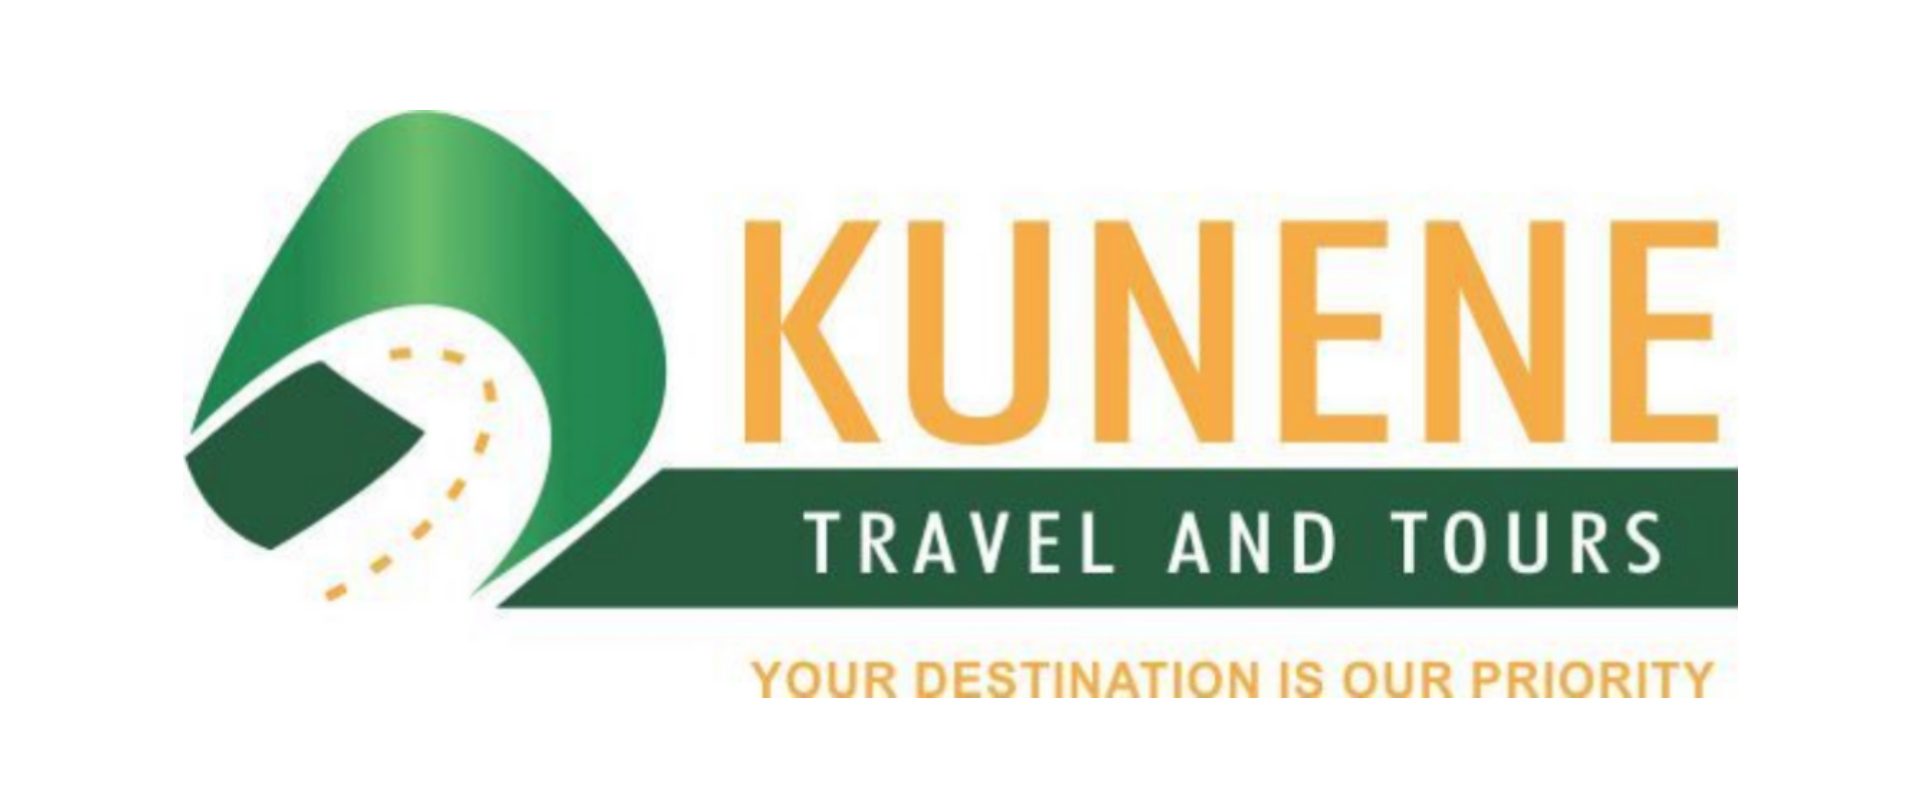 Cunene Travel and Tours Logo